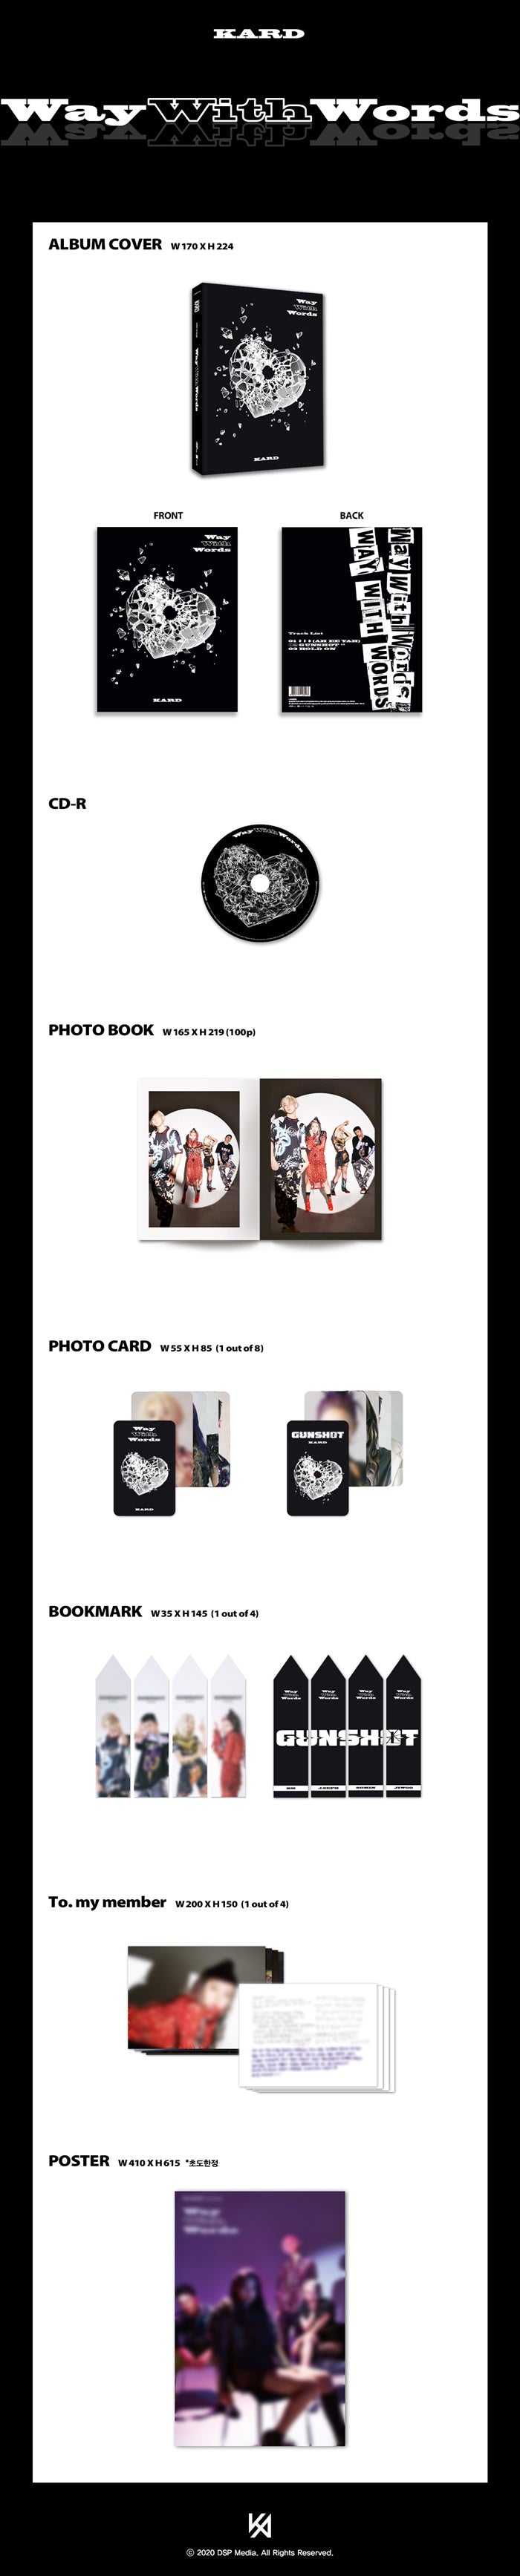 1 CD
1 Photo Book (100 pages)
1 Photo Card
1 Bookmark
1 To.my Member